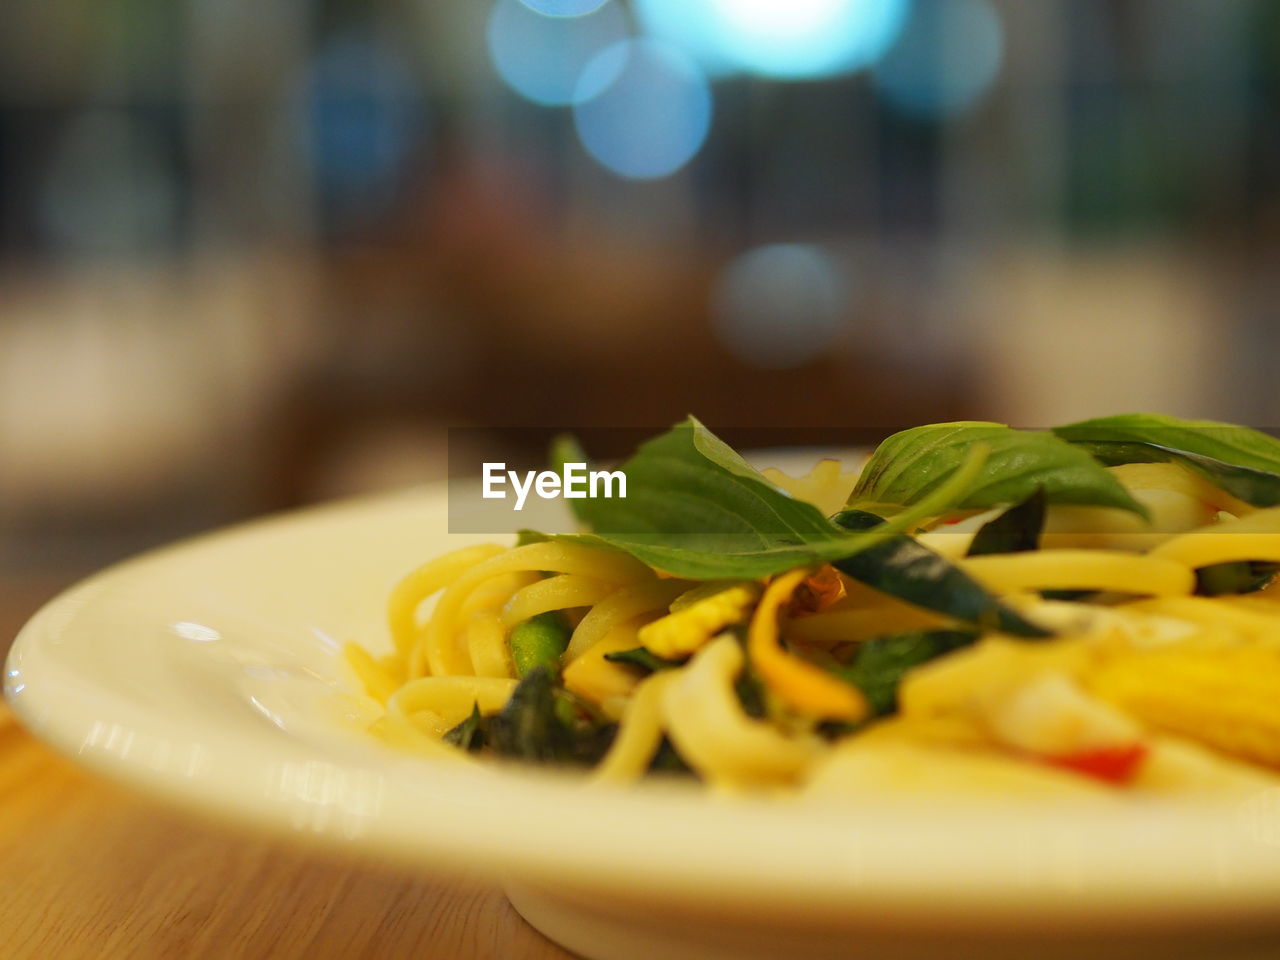 food and drink, food, freshness, healthy eating, dish, italian food, wellbeing, herb, plate, selective focus, cuisine, table, meal, pasta, close-up, no people, indoors, vegetable, produce, defocused, restaurant, yellow, leaf, spaghetti, fruit